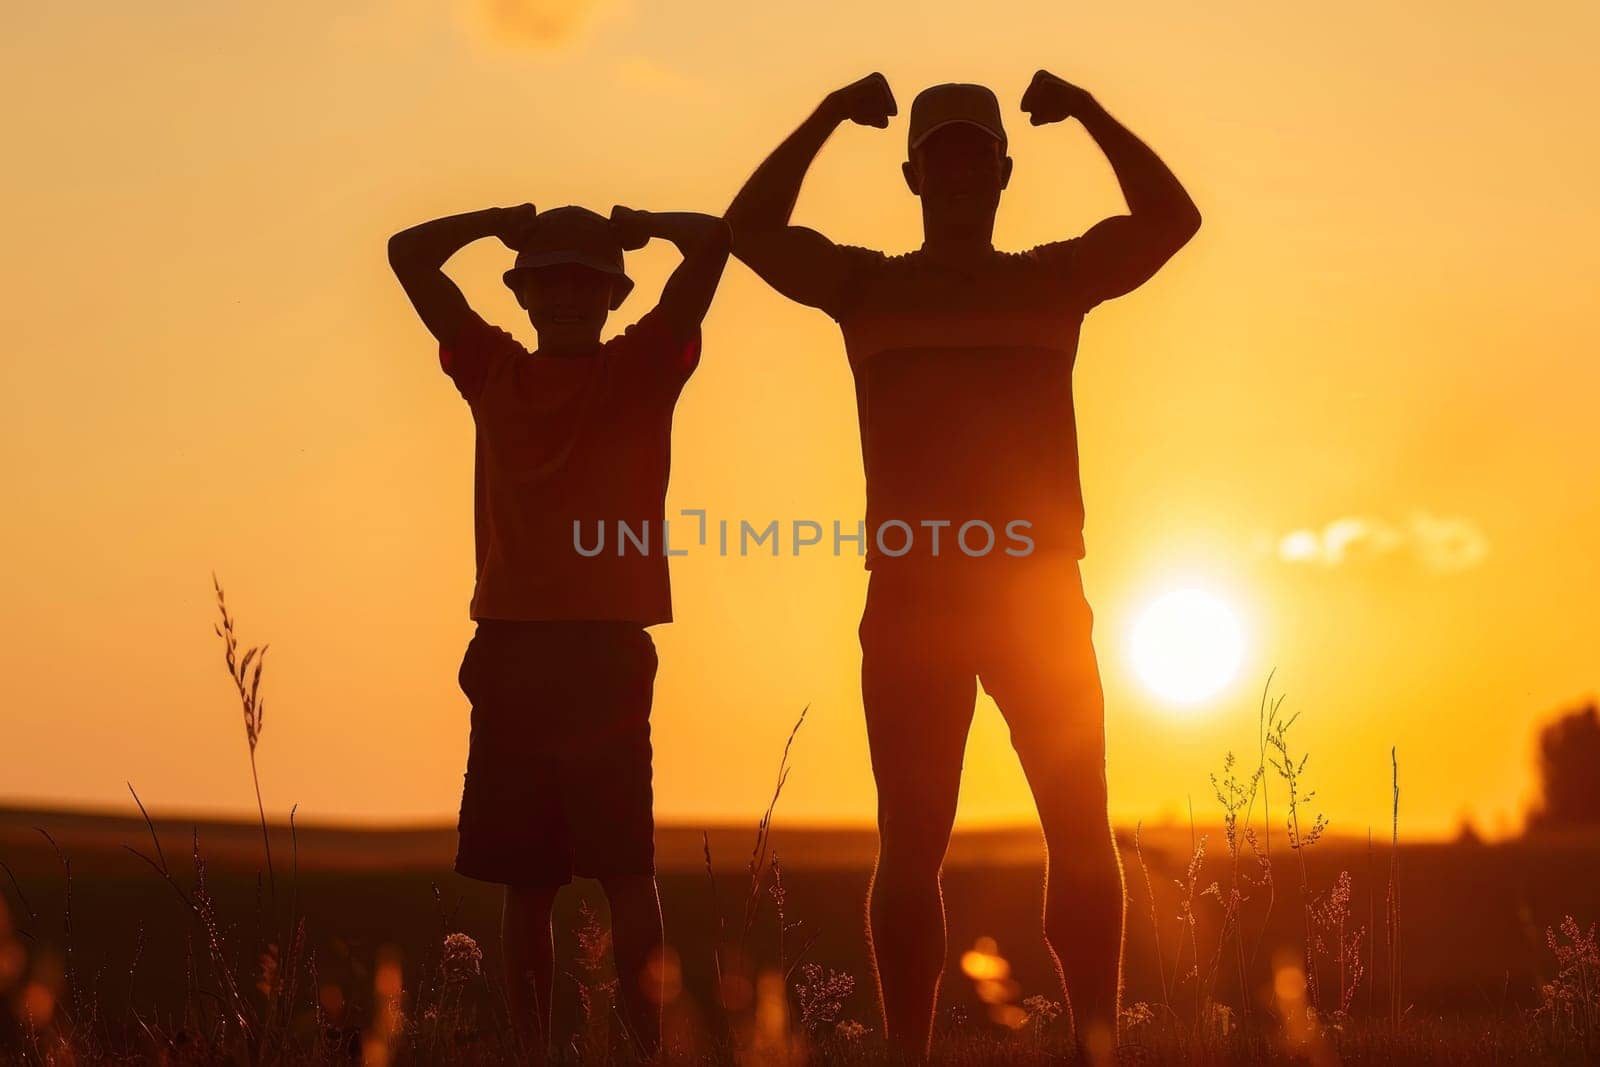 Father and son enjoying the beautiful sunset together, family bonding time in nature, generations at peace